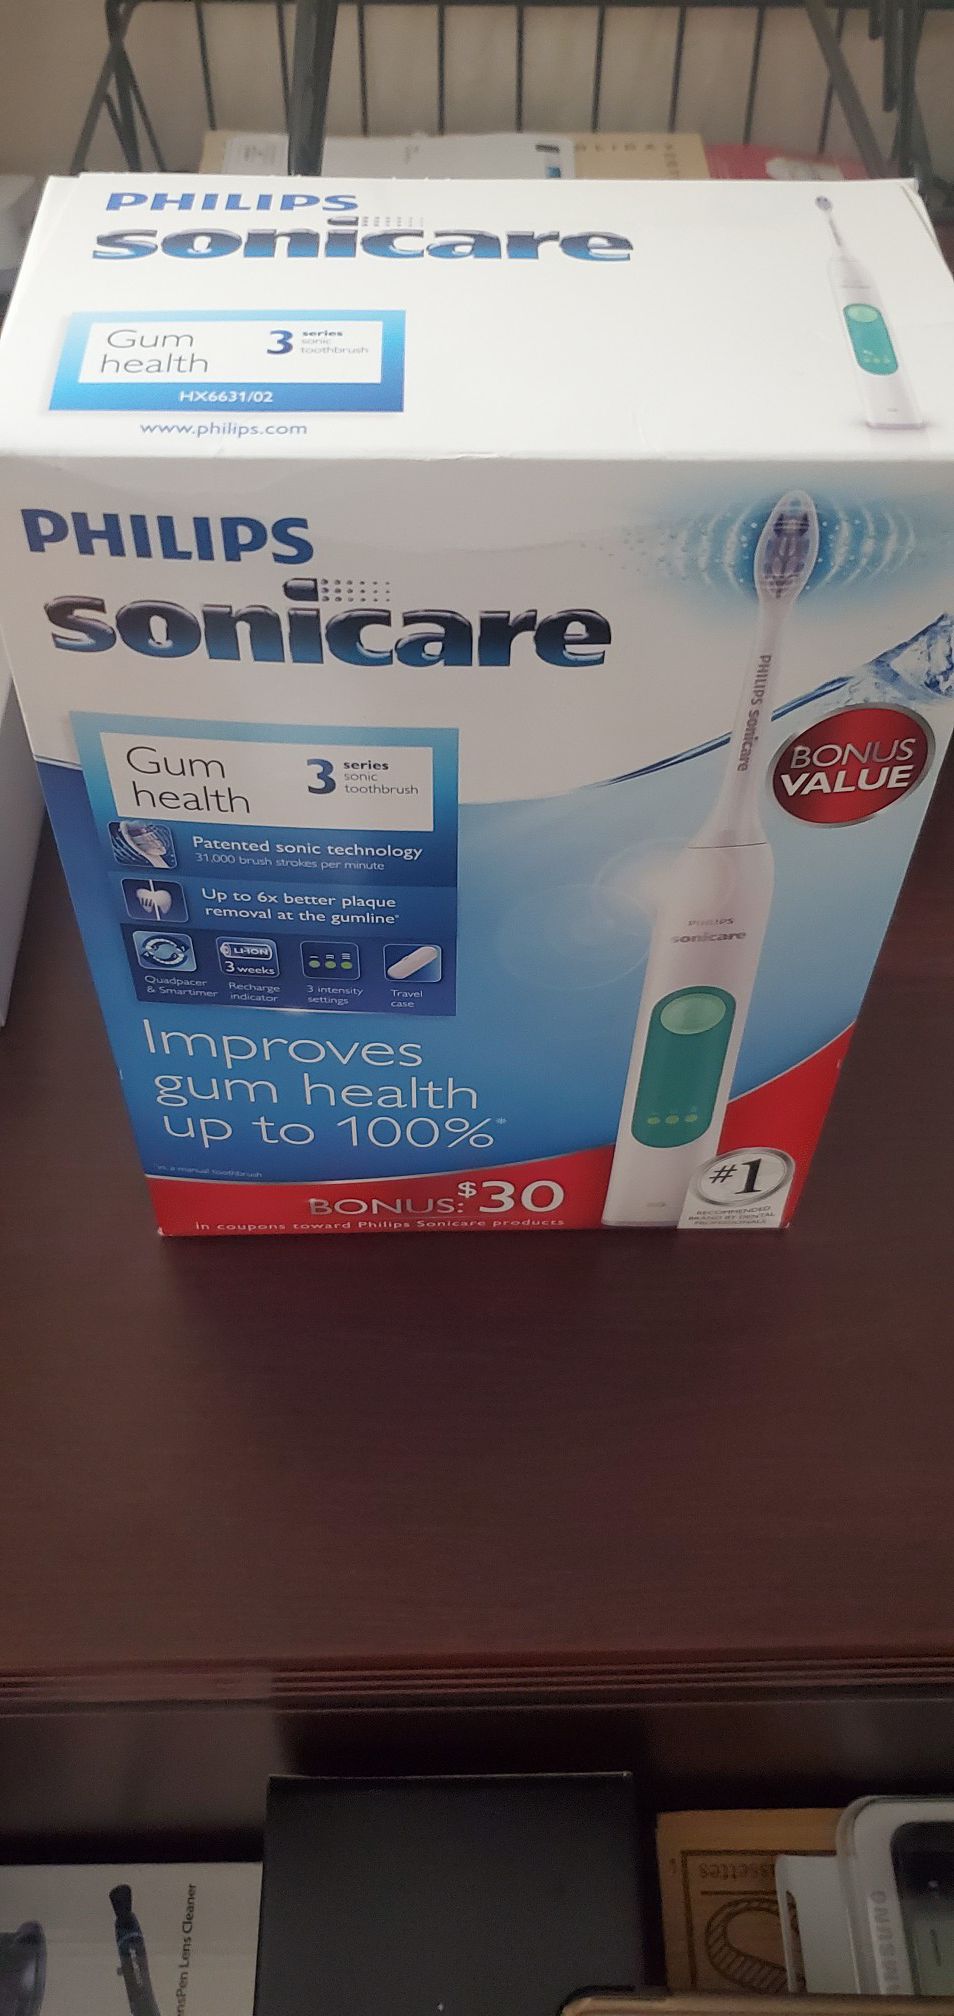 Philips Sonicare 3 Series New Never Opened Box, gum health rechargeable electric toothbrush, HX6631